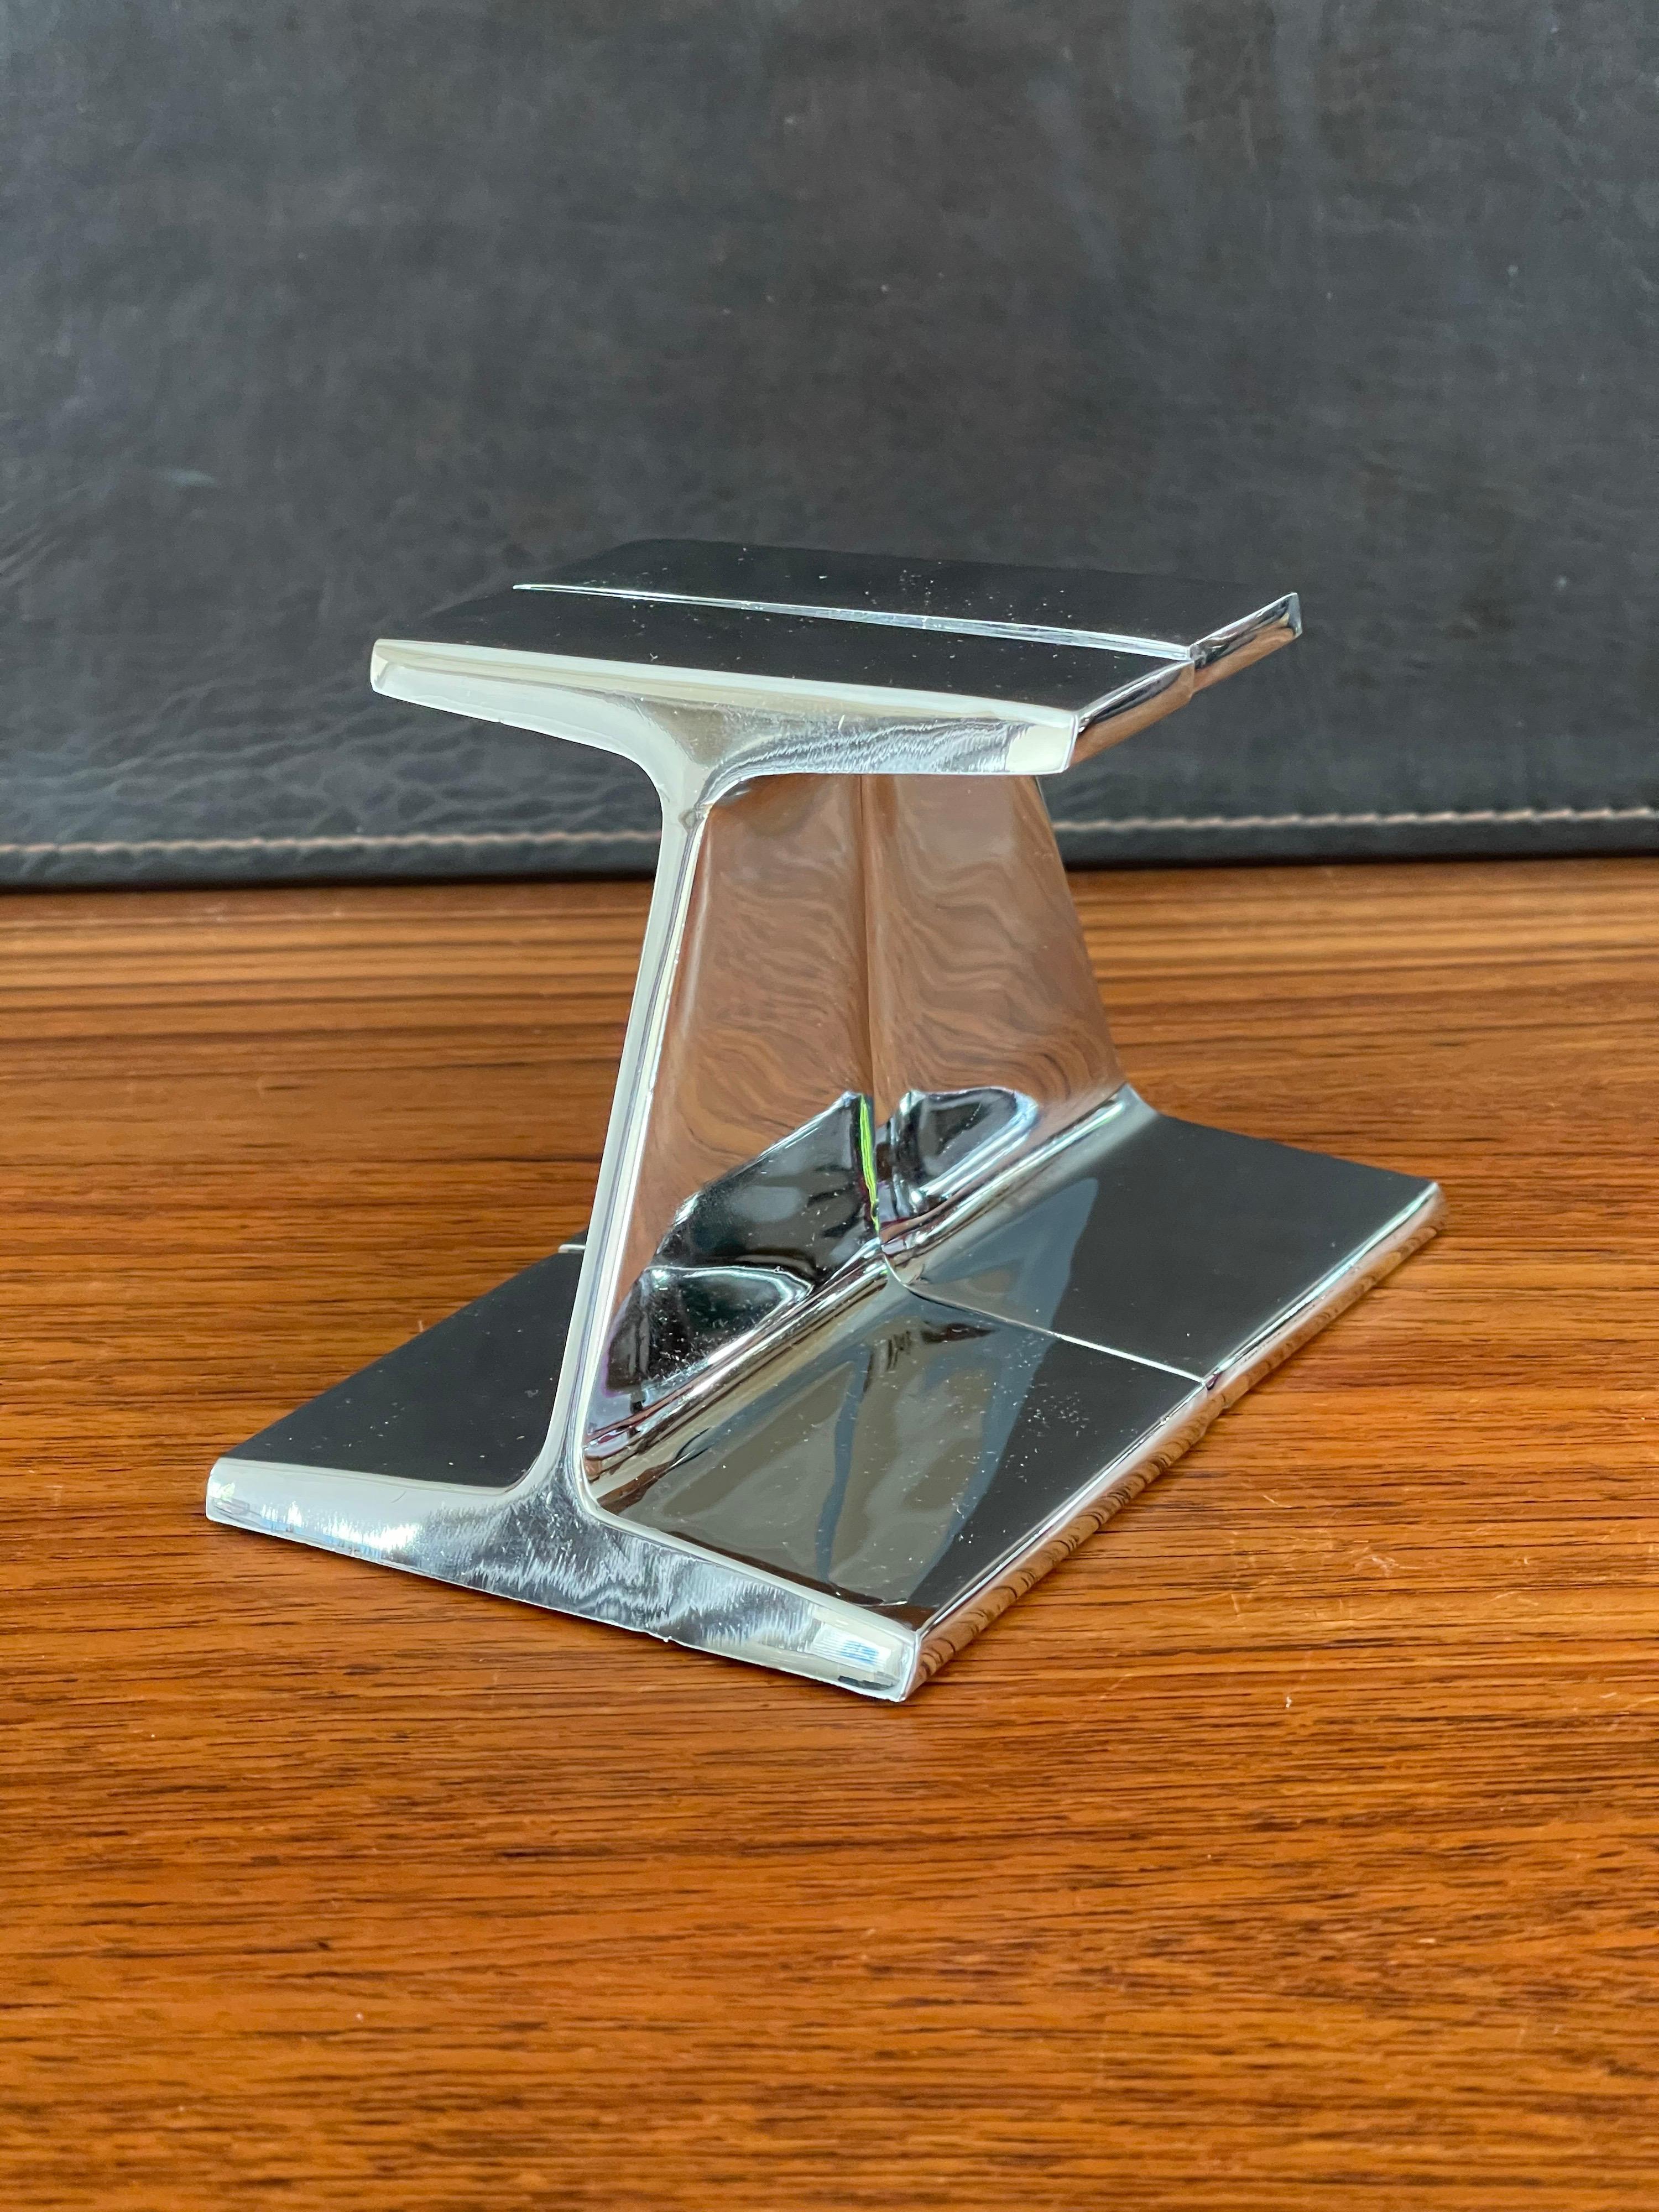 Gorgeous pair of modernist chromed steel I-beam bookends by Bill Curry for Design Line, circa 1970s. The pair are in very good vintage condition and measure 6.125